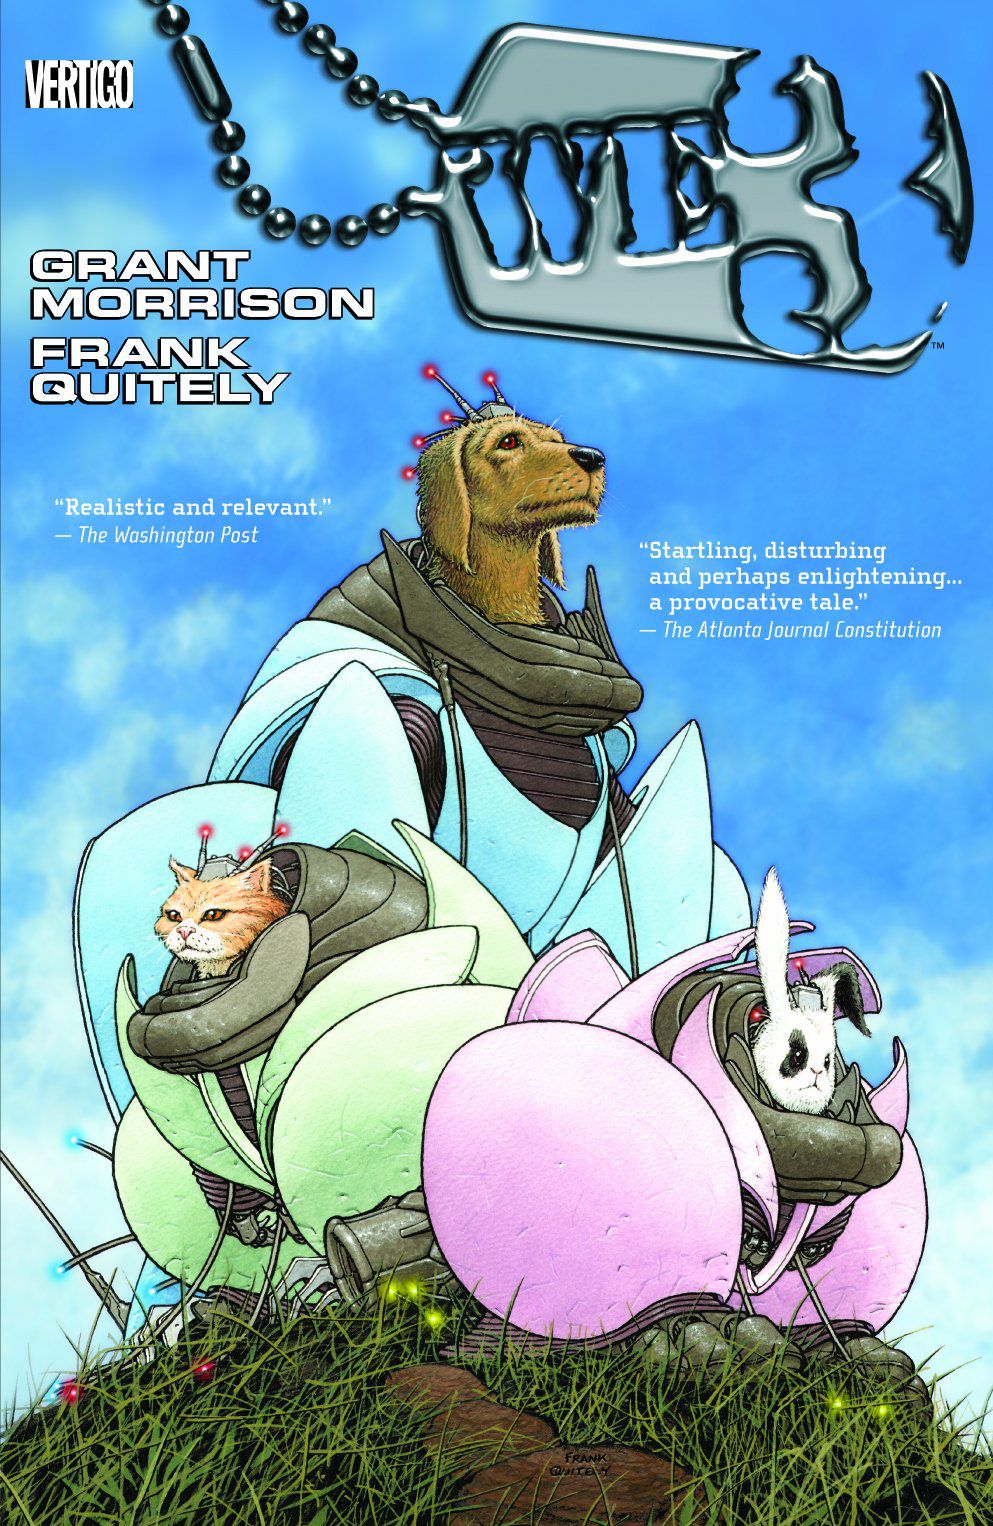 A dog, a cat, and a rabbit, all augmented by bubble-like suits of overlapping armor plates, on the cover of WE3. 